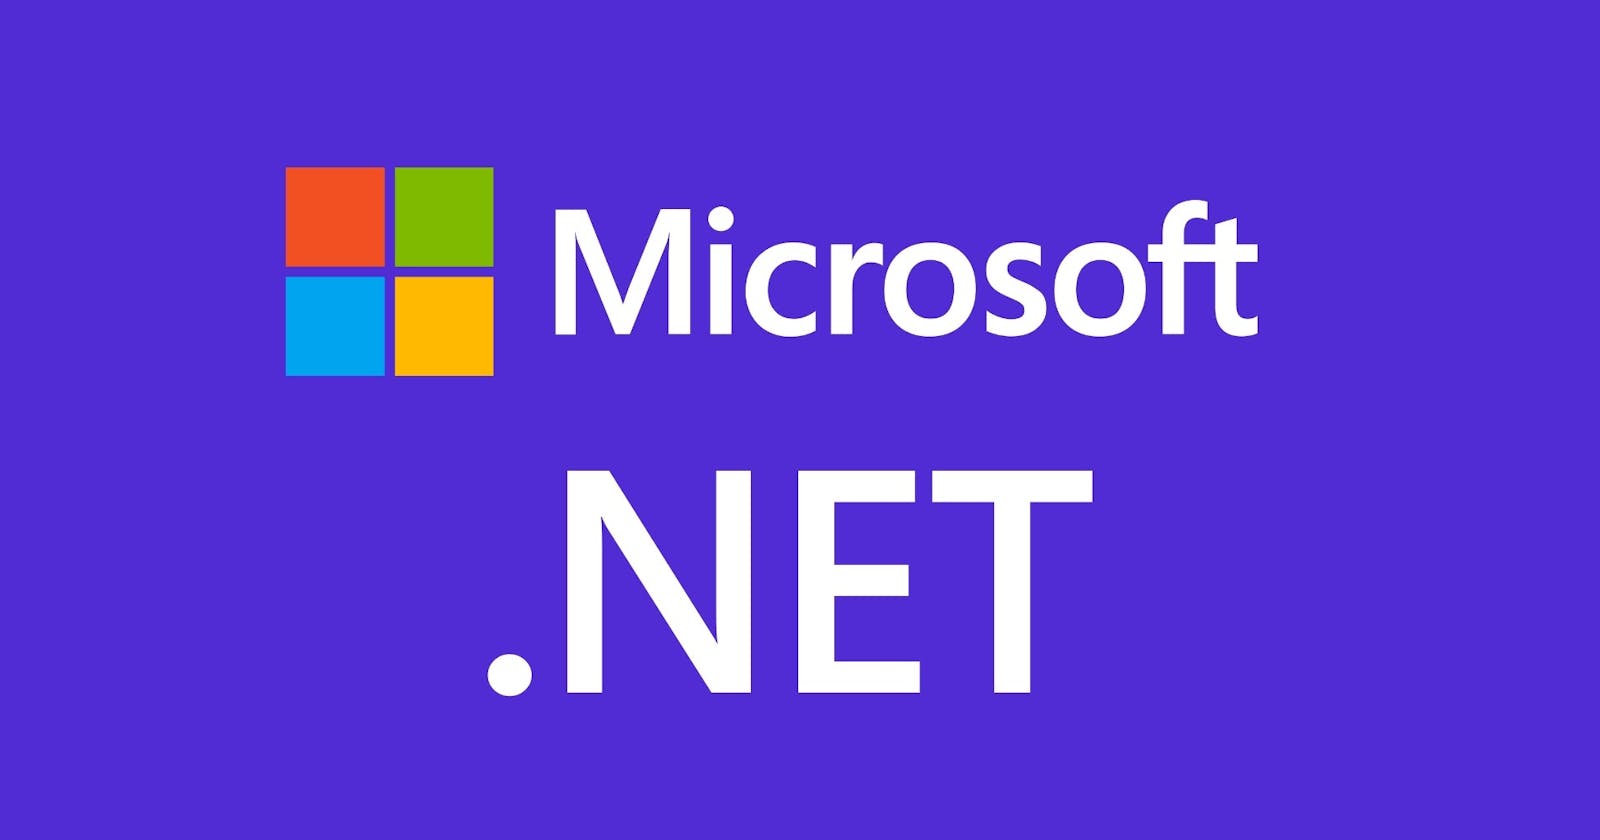 How to Host ASP.NET on IIS Web Server - (Part2)